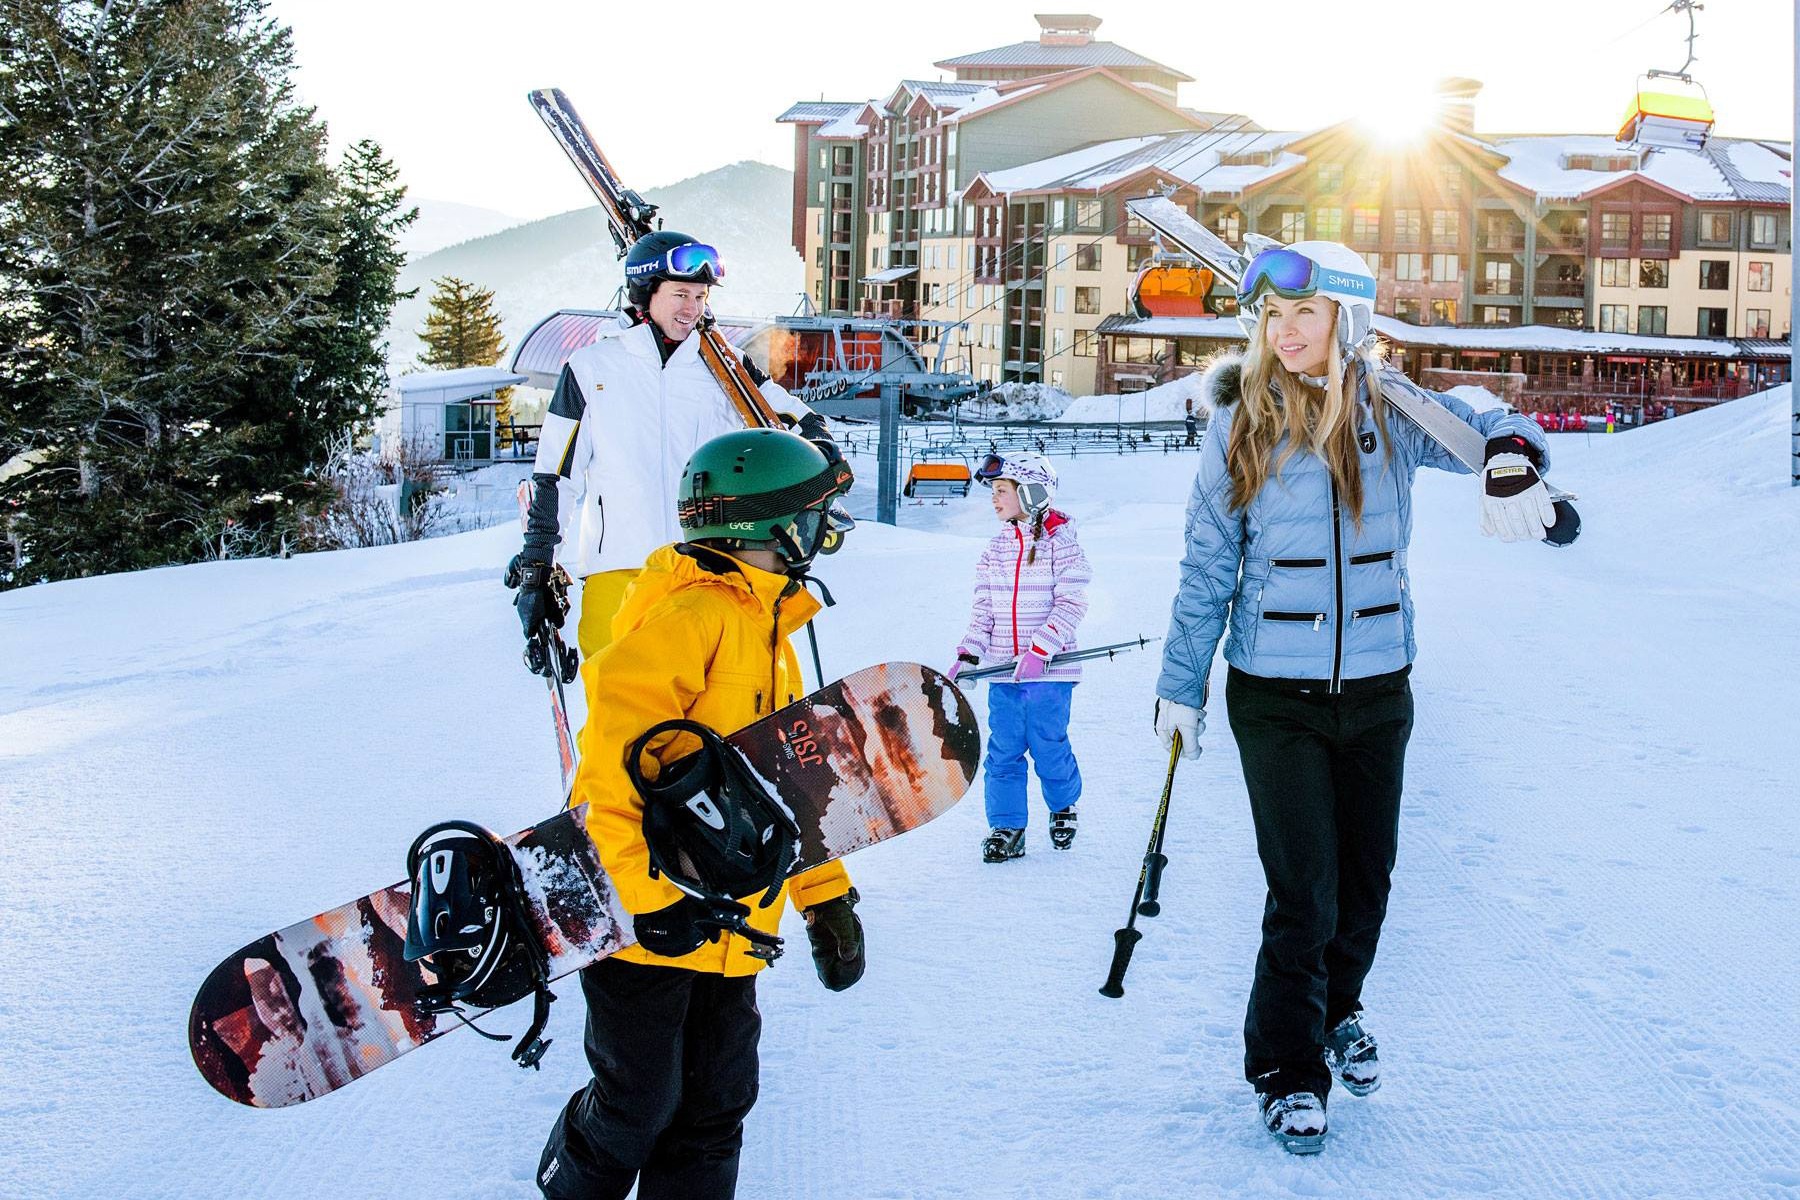 5 days in Park City a family ski vacation guide